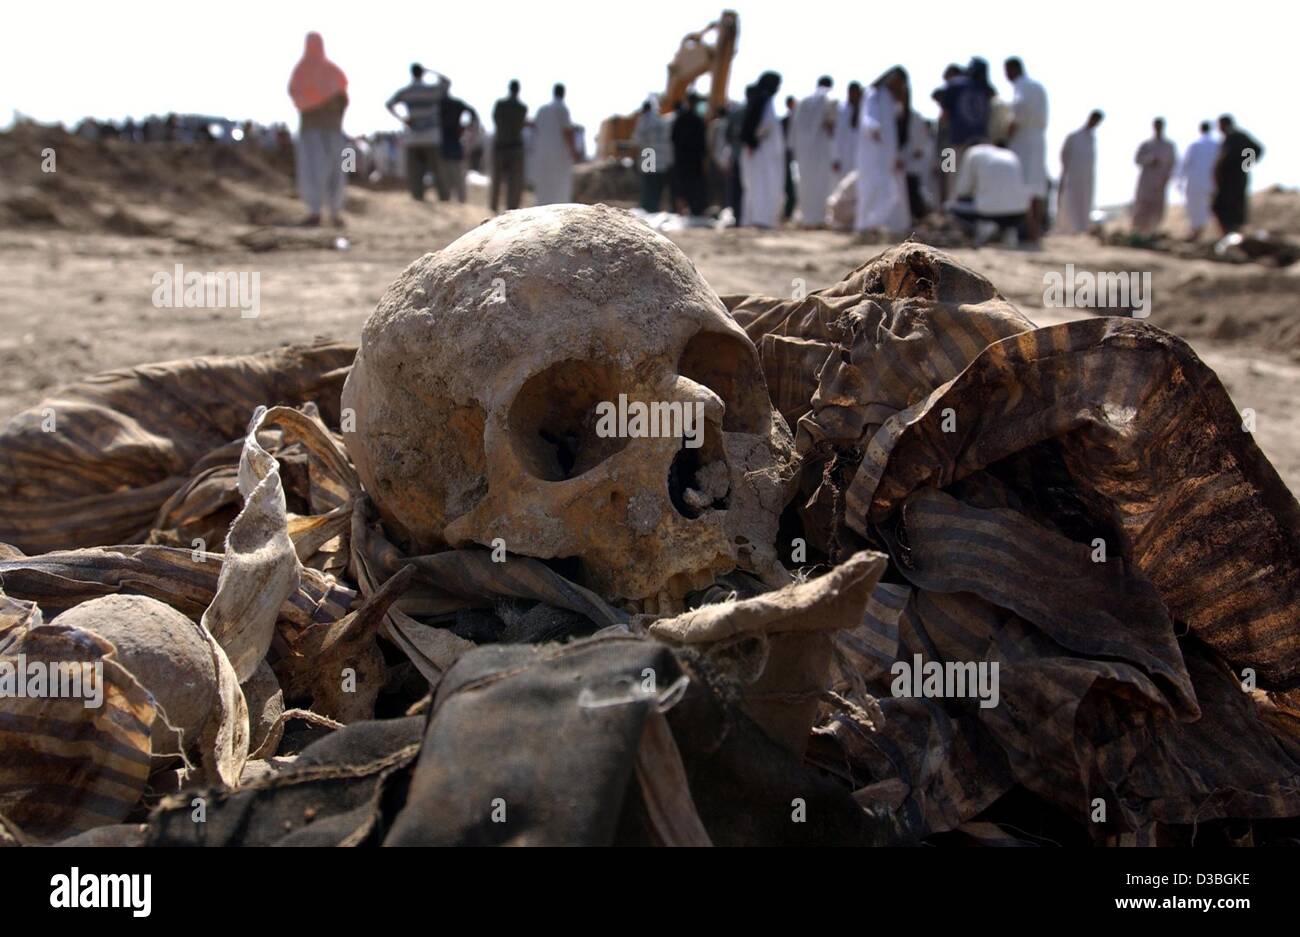 (dpa) - Human remains of bodies are being pulled from a mass grave near the village of El Khatonia, 80 kilometers south of Baghdad, 14 May 2003. Groups of Iraqis searched through thousands of plastic bags containing the remains of Iraqi soldiers and some civilians who were discovered in the mass gra Stock Photo